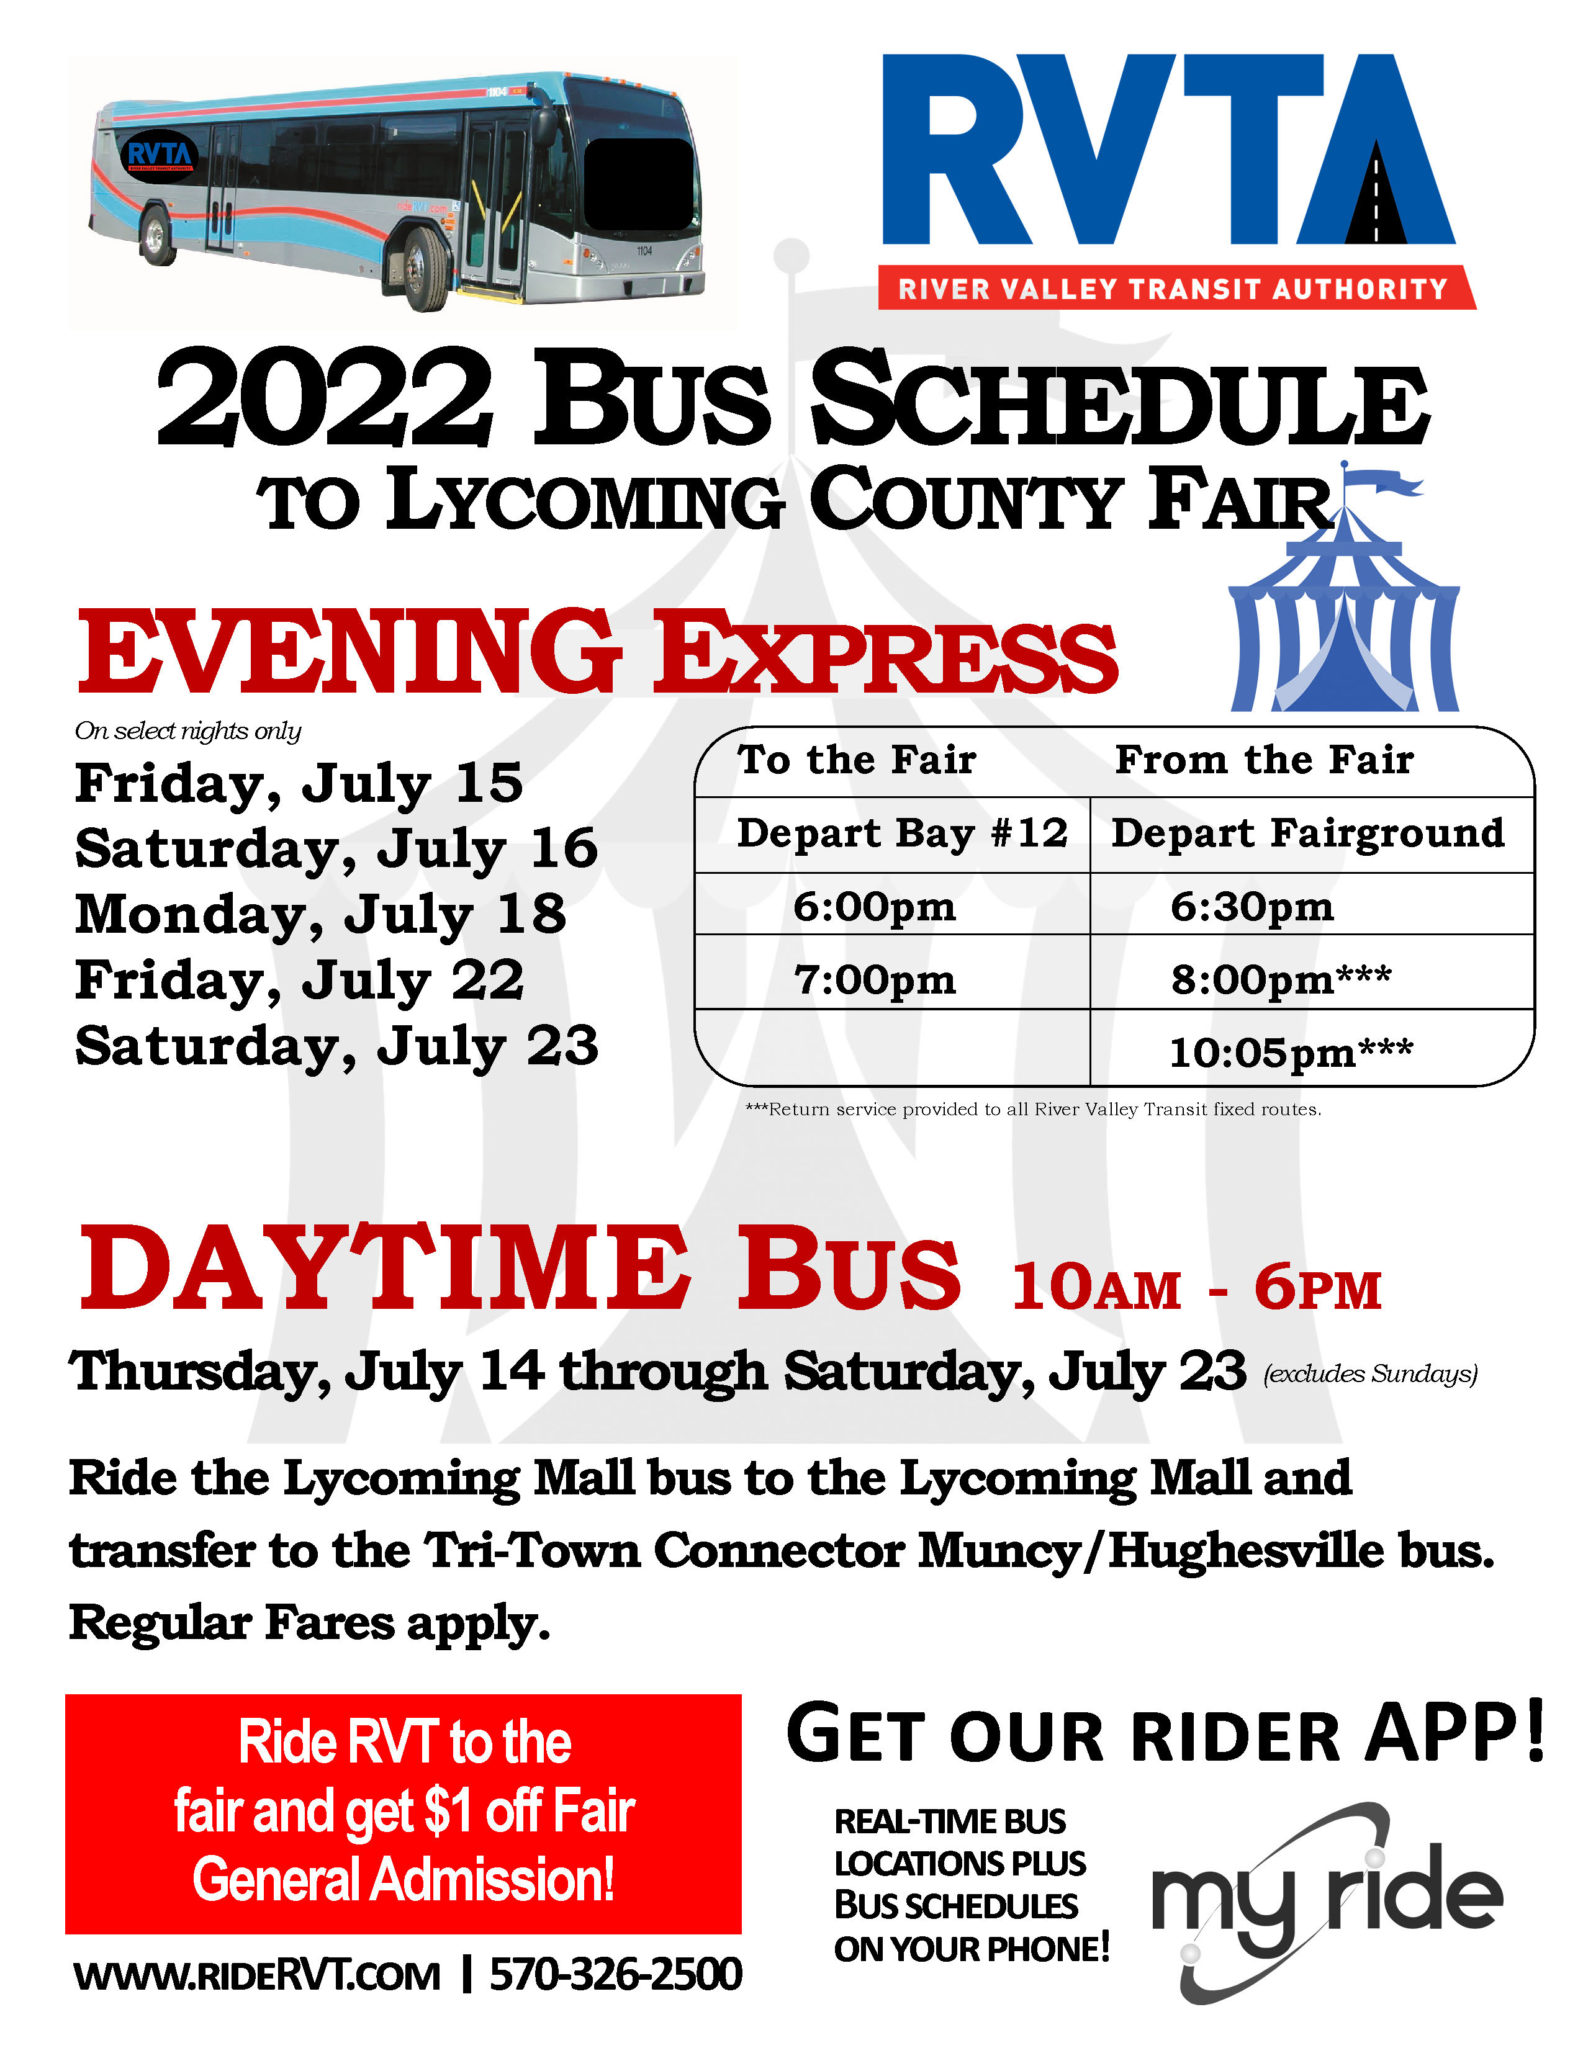 2022 RVTA Bus Schedule for 151st Lycoming County Fair – River Valley Transit